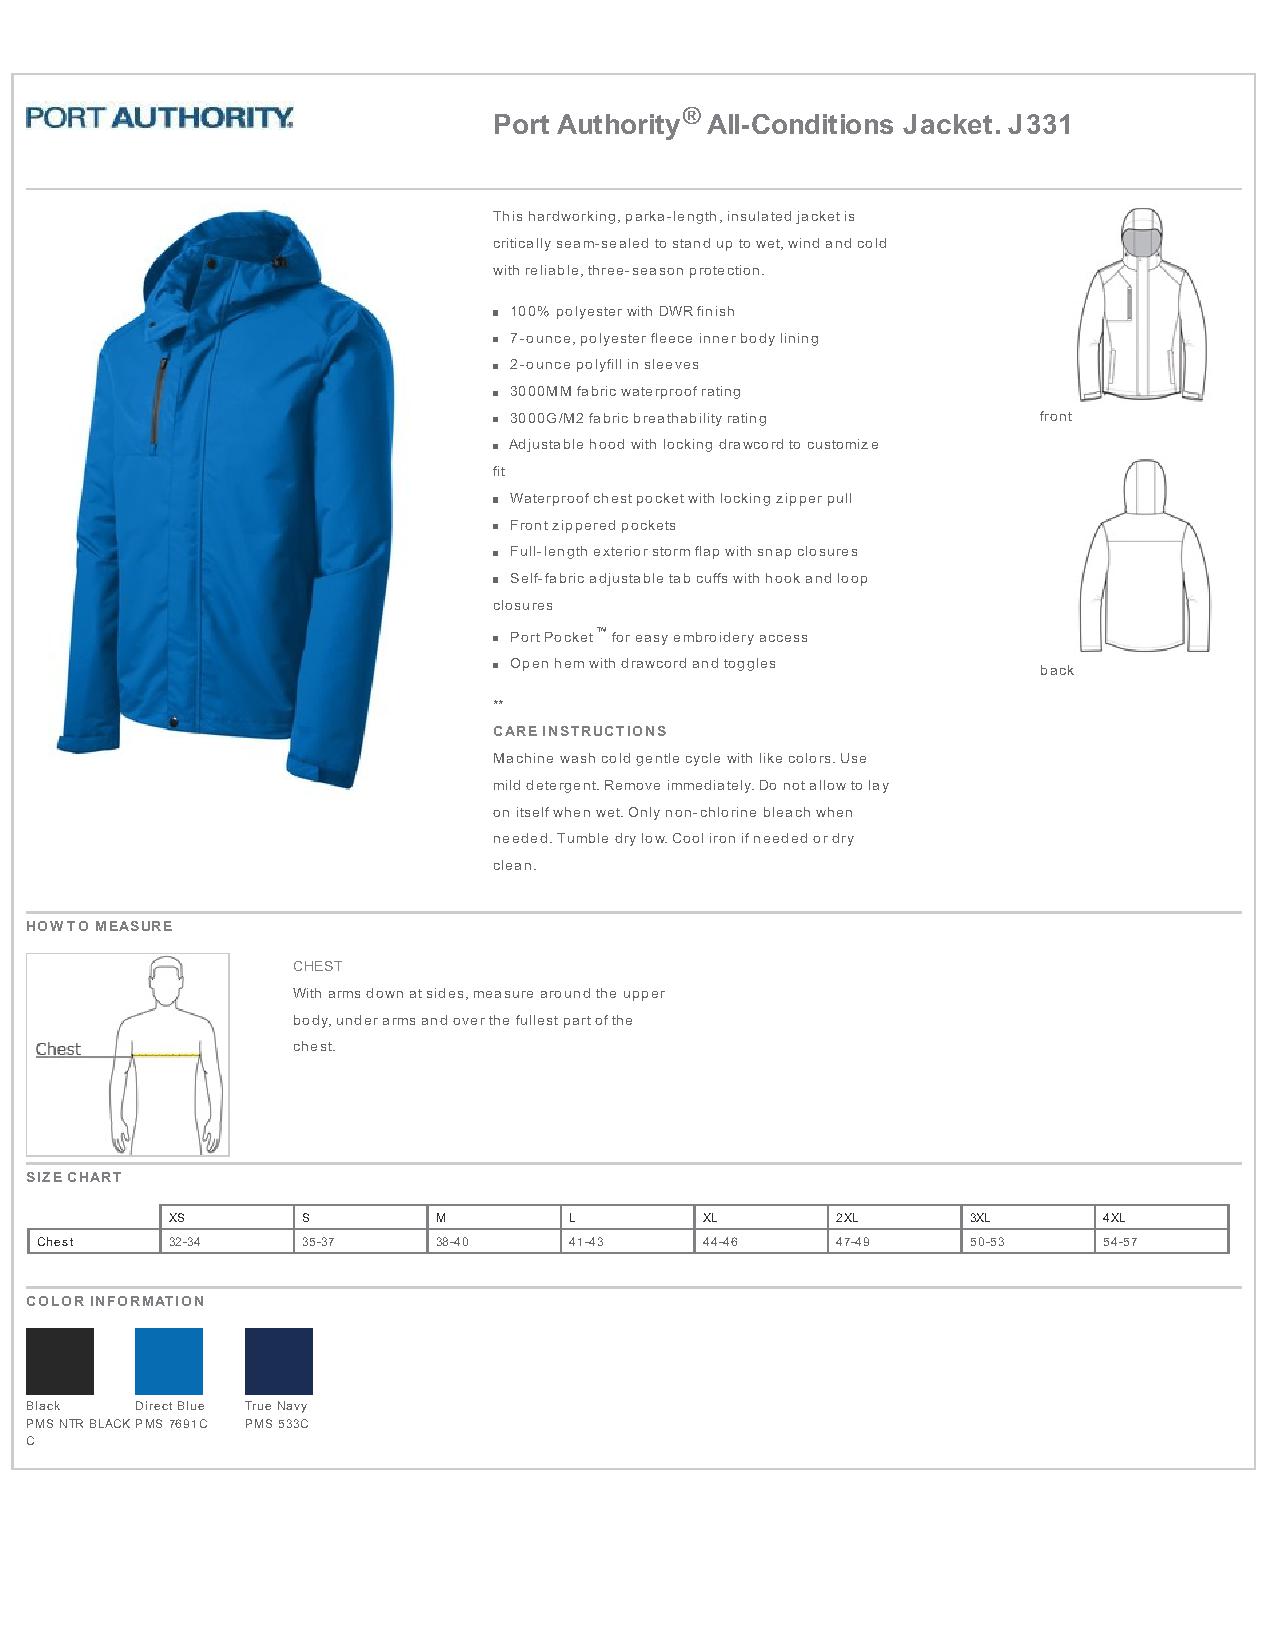 Port Authority J331 - All-Conditions Jacket - Outerwear